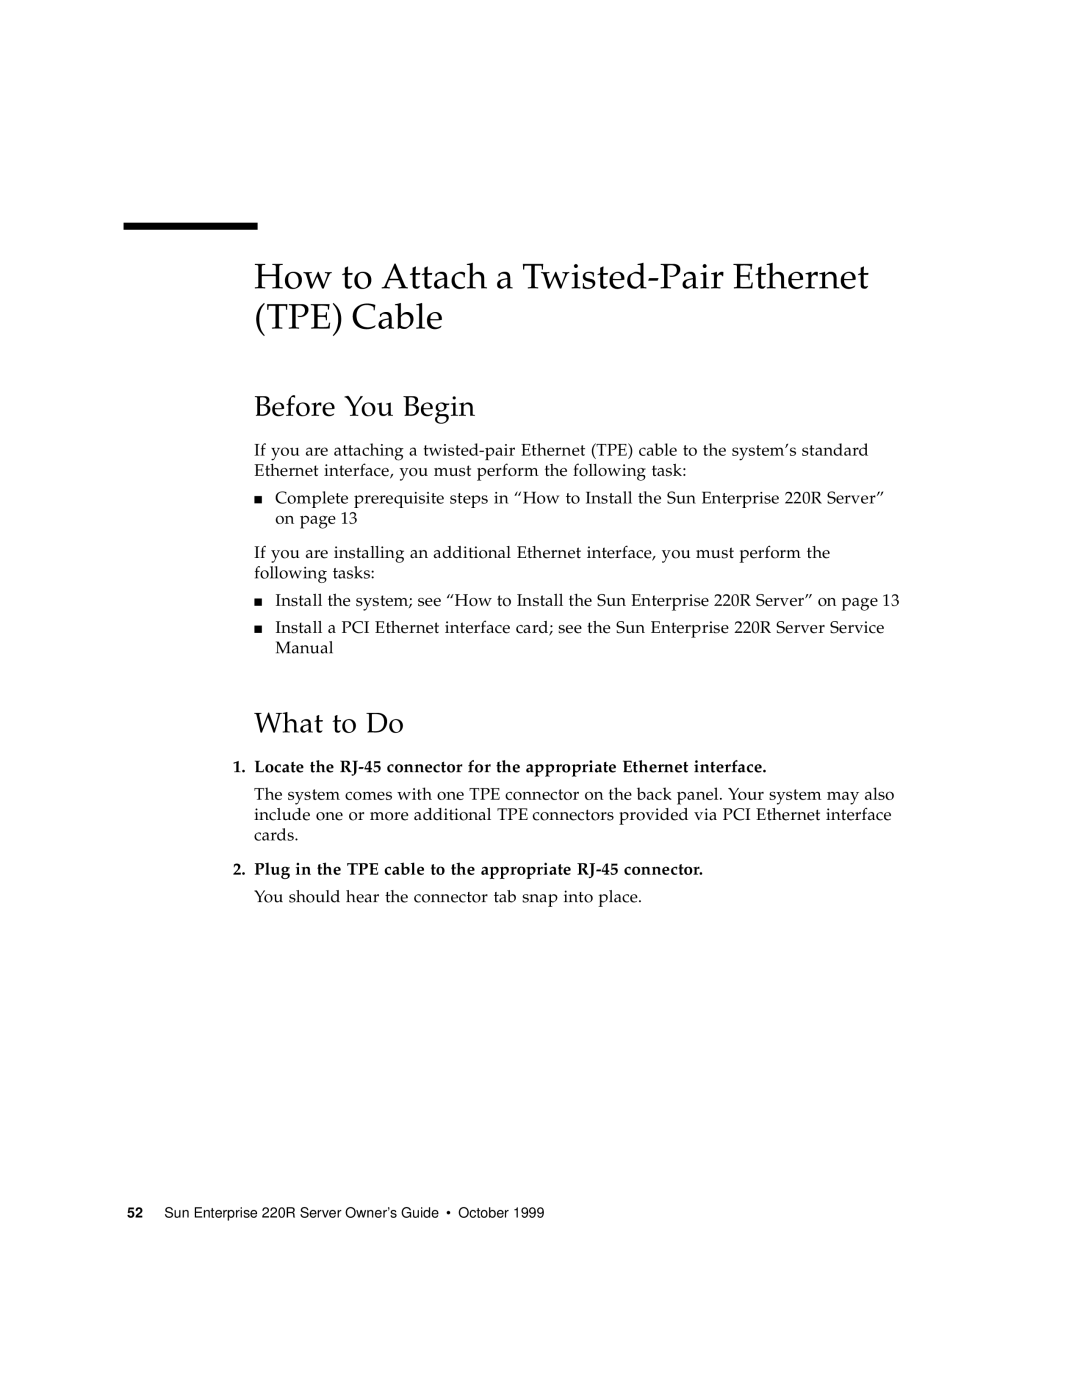 Sun Microsystems 220R manual How to Attach a Twisted-Pair Ethernet TPE Cable, Before You Begin, What to Do 